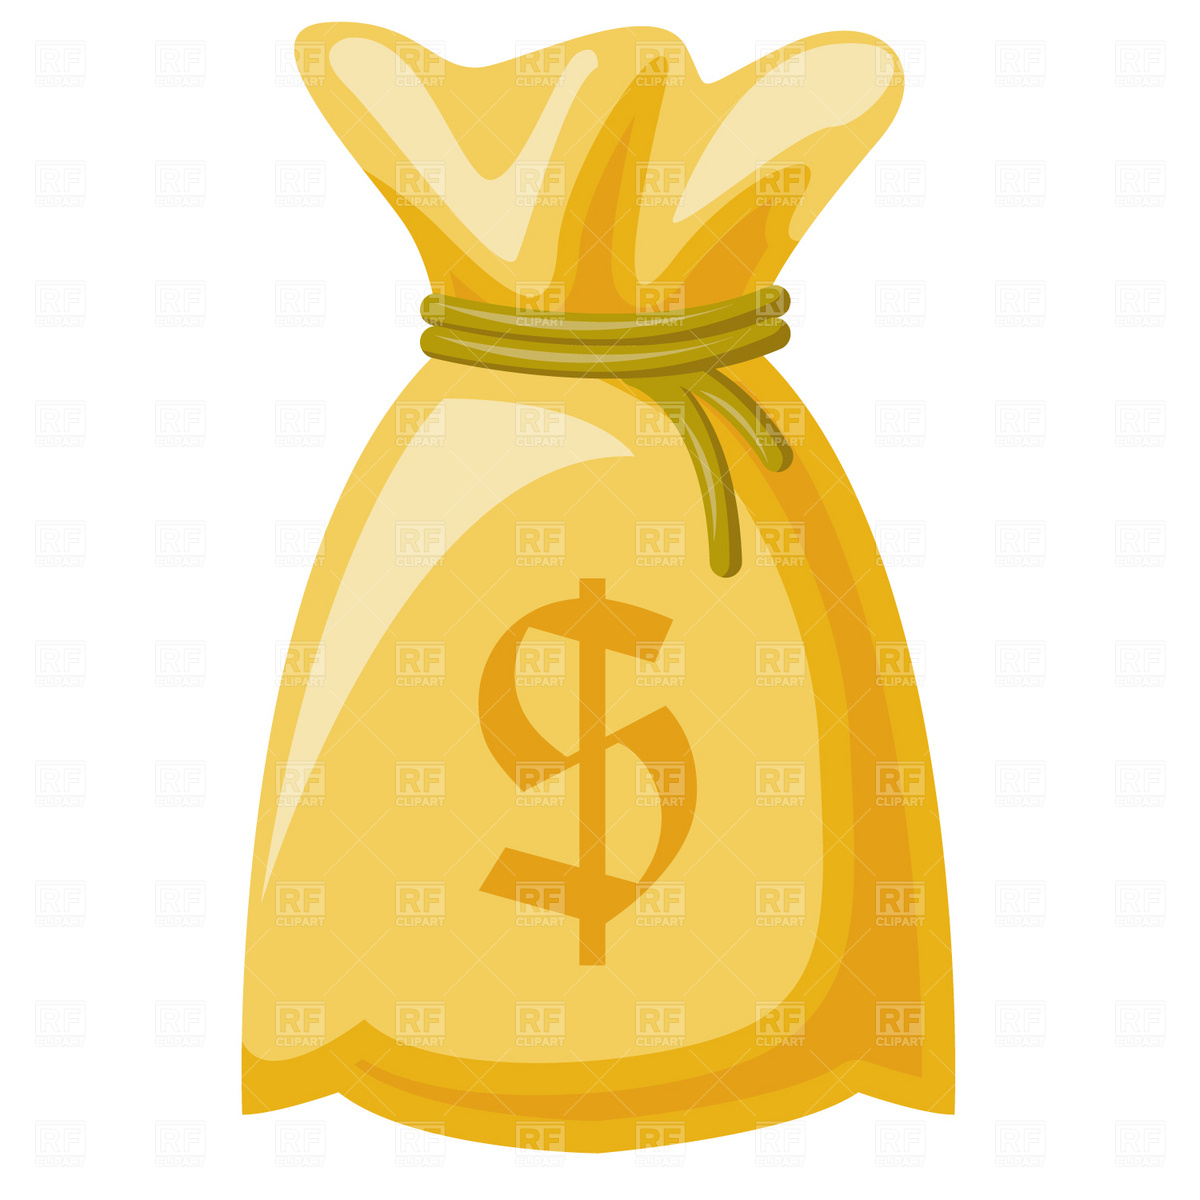 Money Sack 1627 Business Finance Download Royalty Free Vector Clip